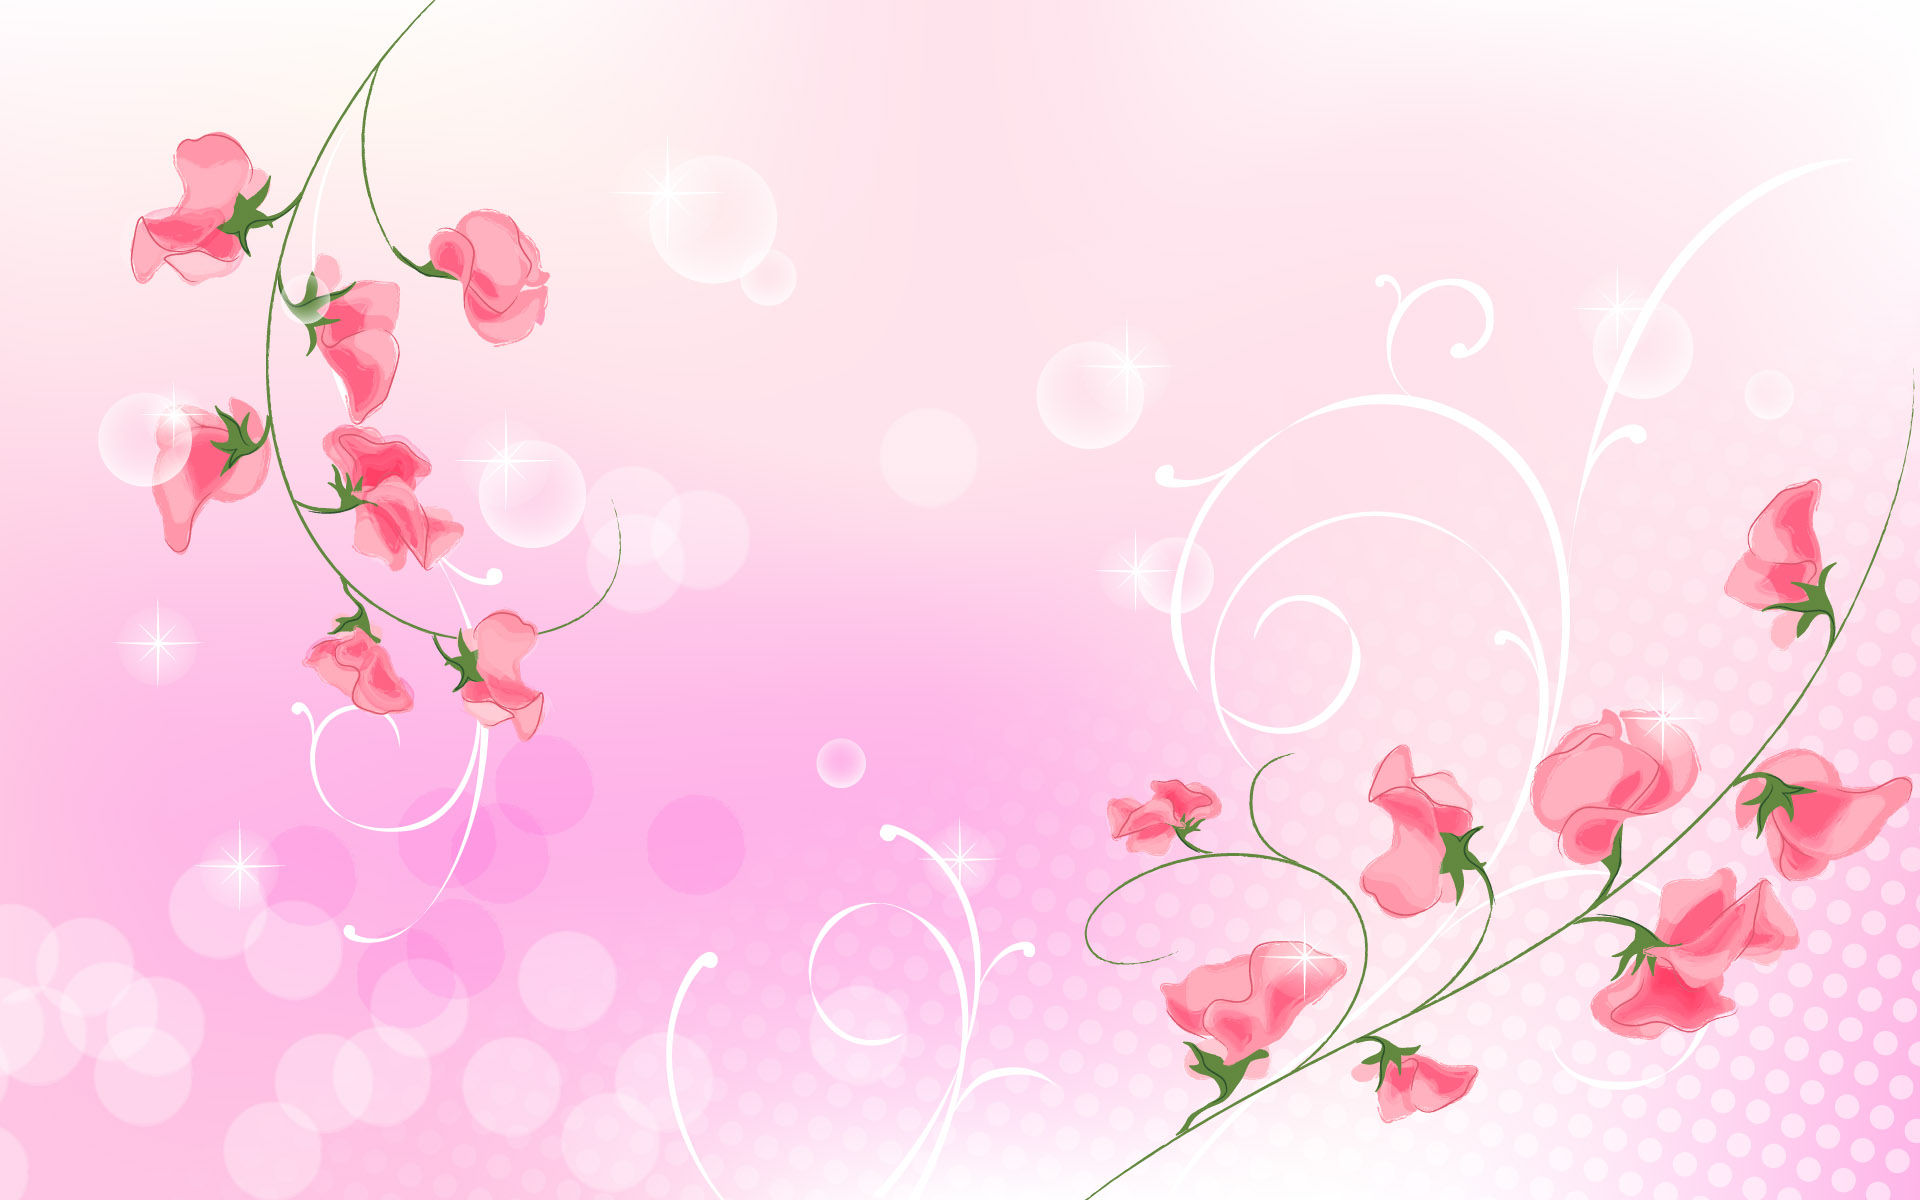  Background a Great Fit for Each Other Cartoon Flowers Wallpaper